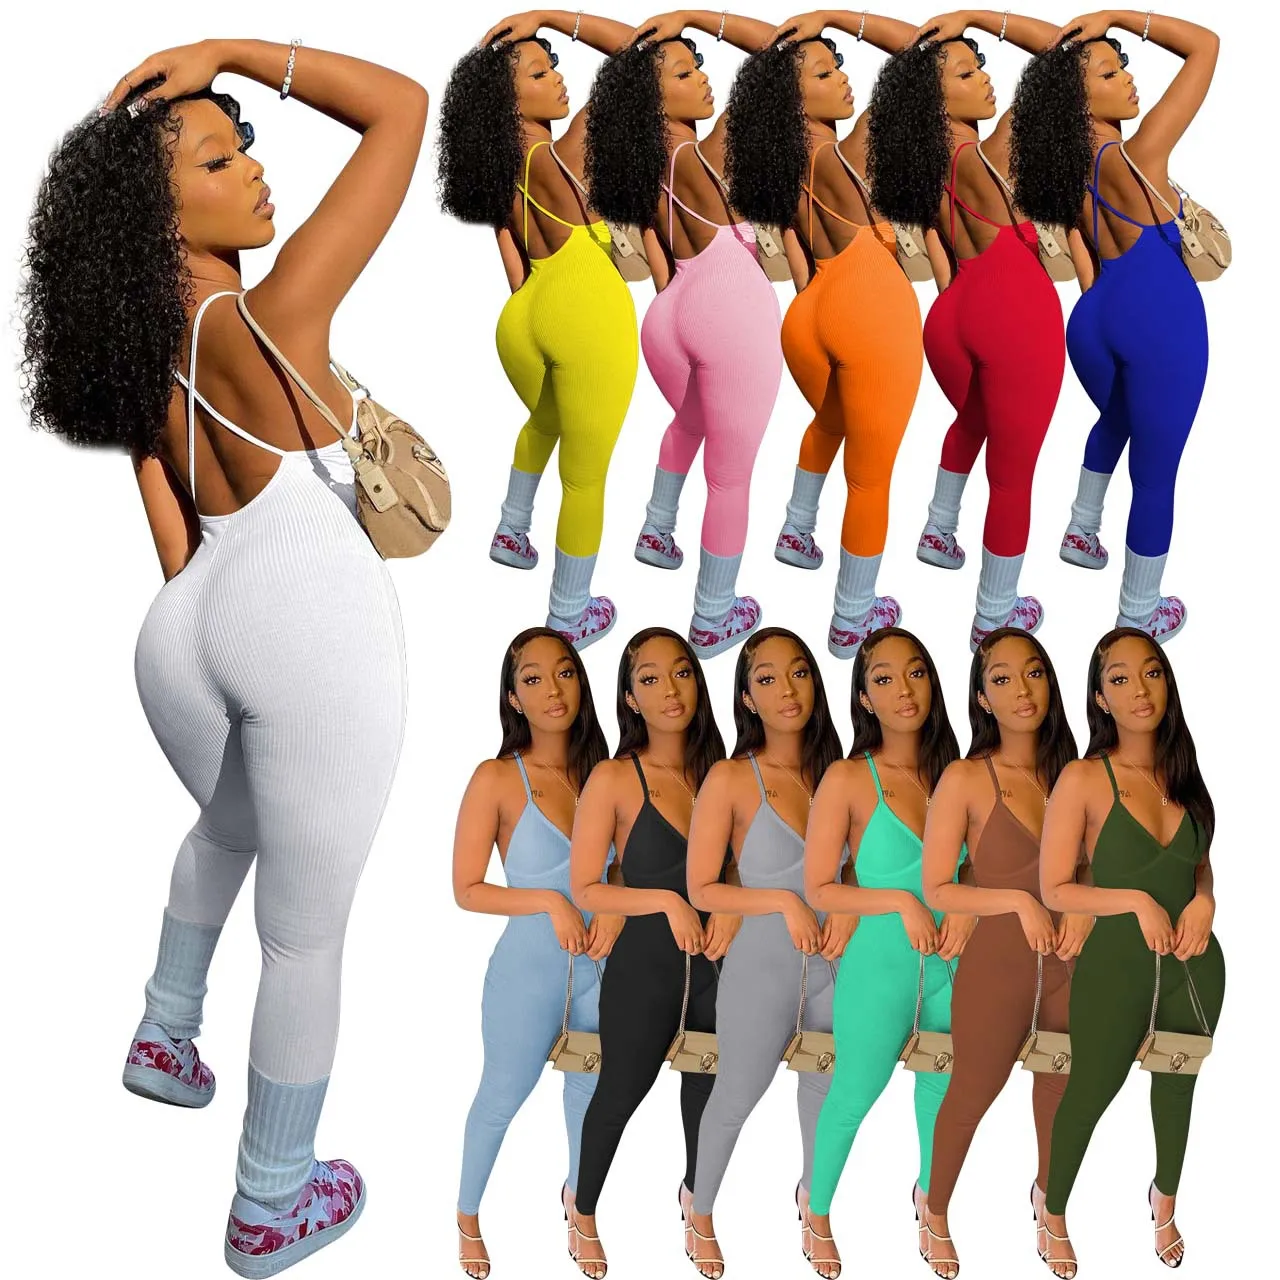 

V Neck One Piece Sexy Backless Jumpsuit 2022 New Arrive Women's Summer Yoga Jumpsuit Overall Outfit Long jogger Romper Ribbed, White black blue